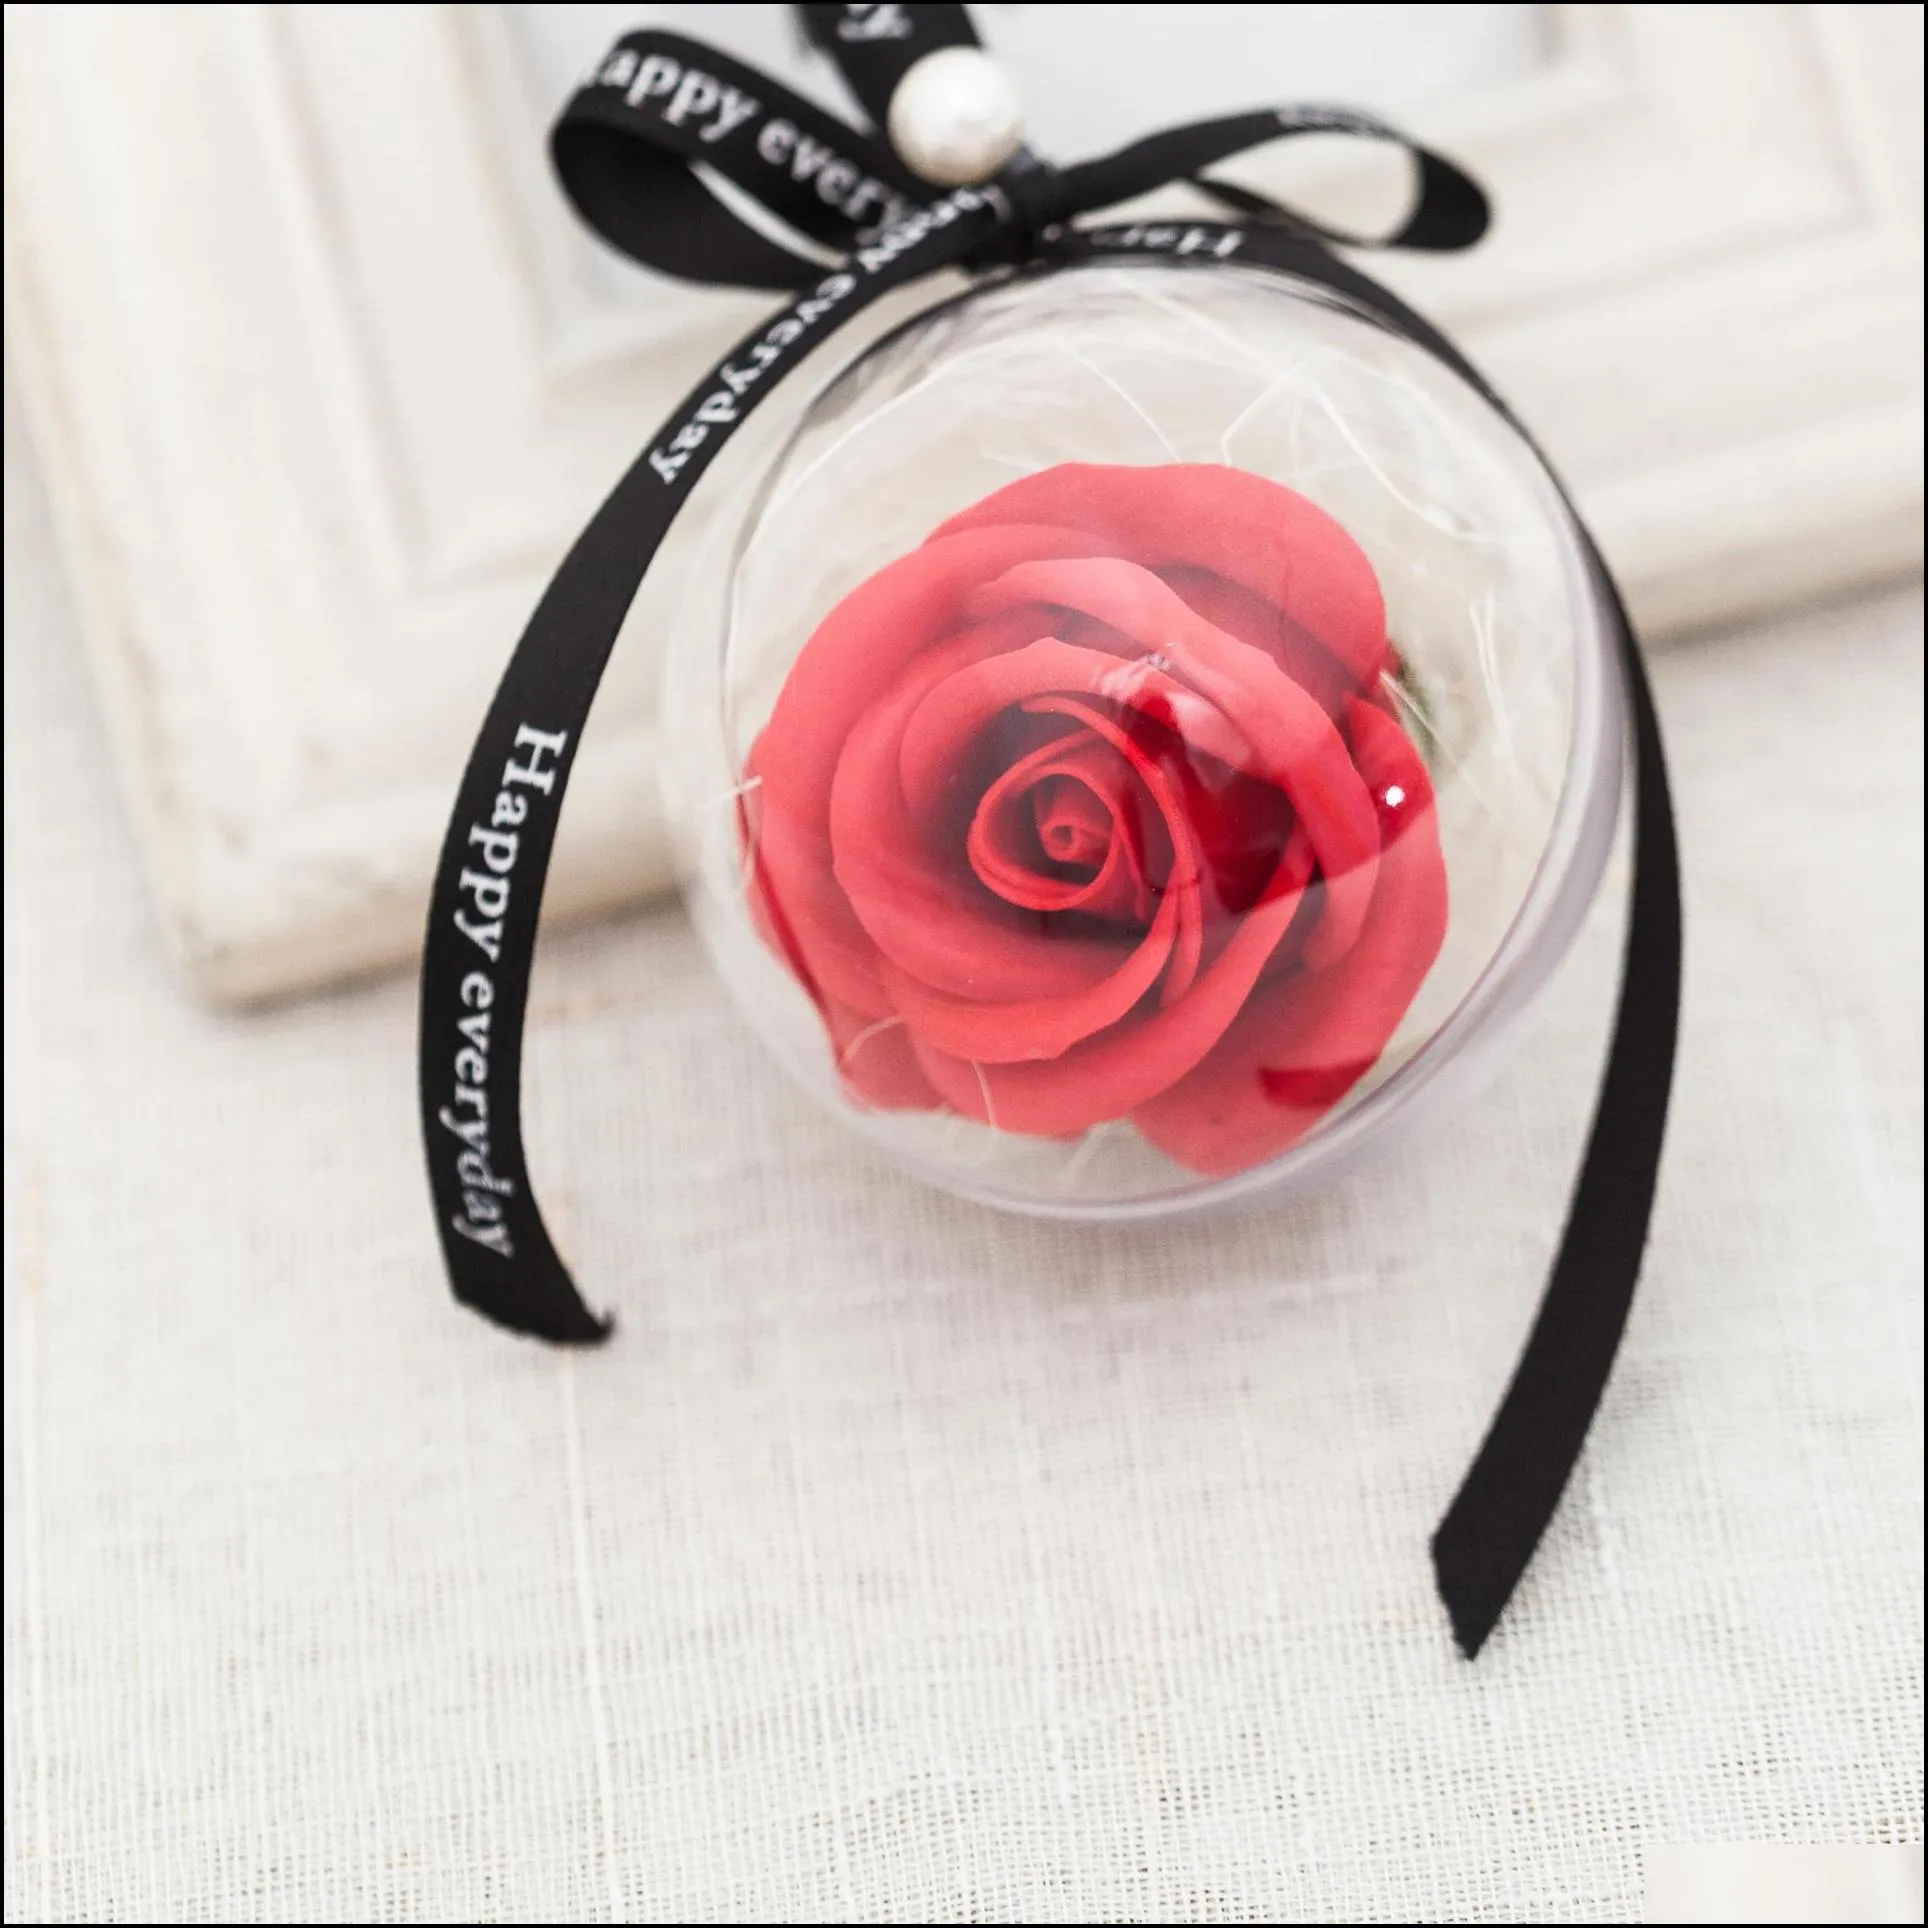 simulation bouquet rose soaps ball petal home wedding decorations artificial soap flower for valentines mother day gifts romantic 3 5dc